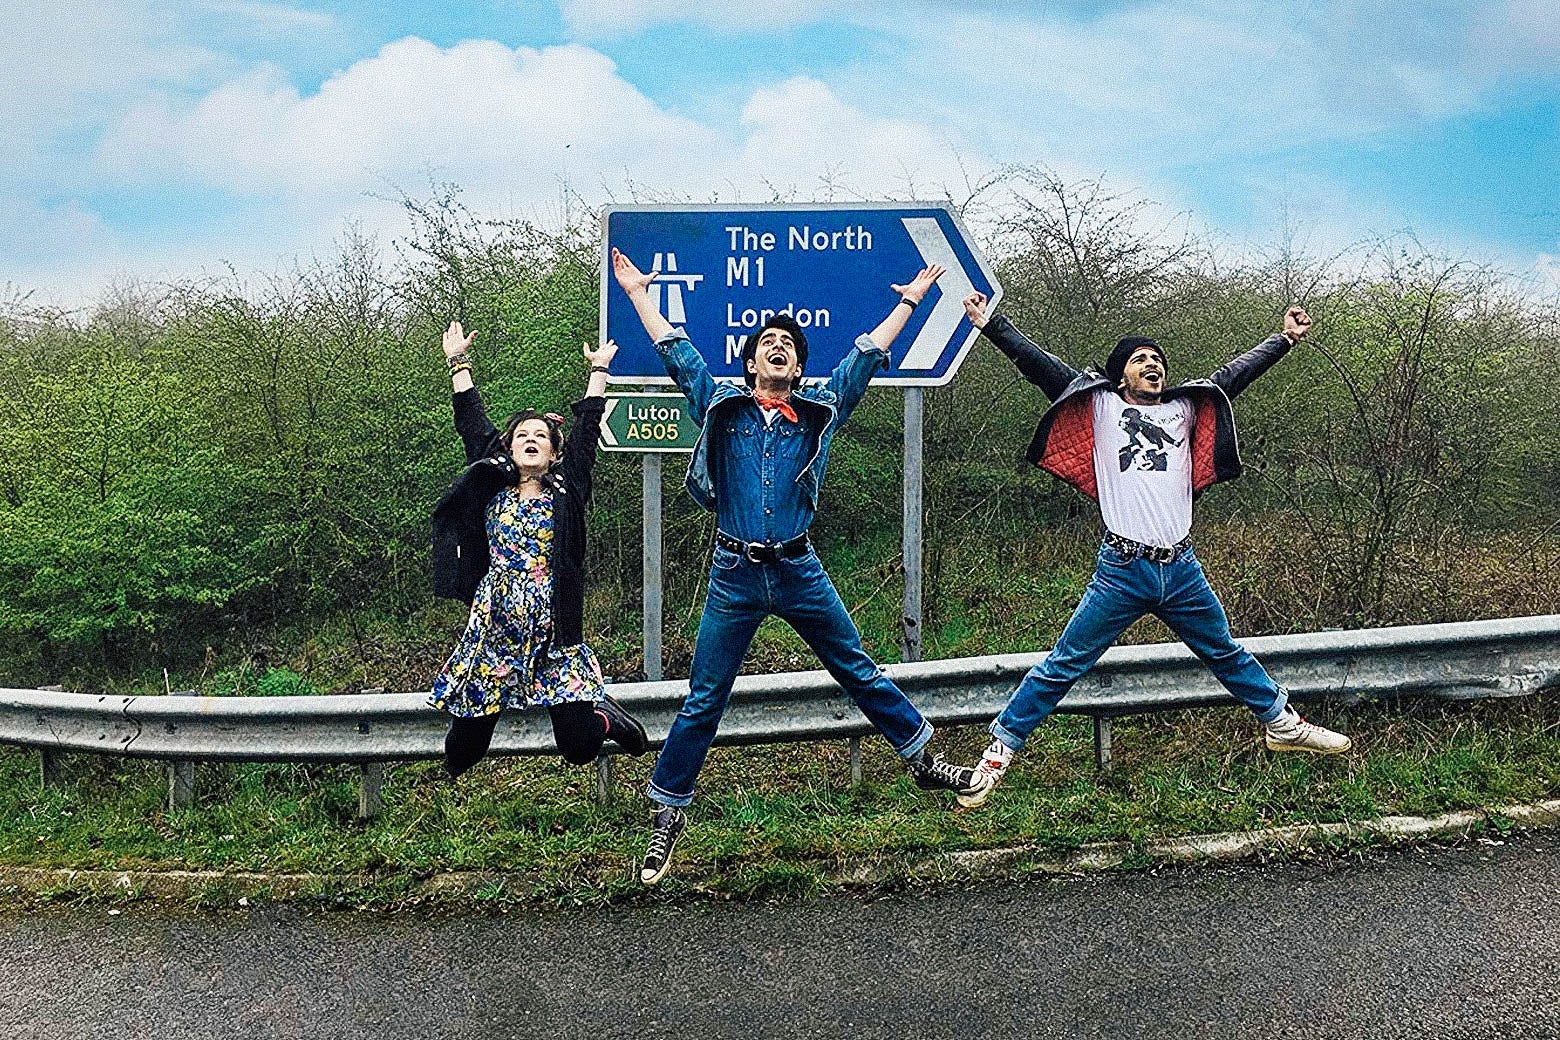 The three characters jump for joy in front of a road sign in a still from the movie.